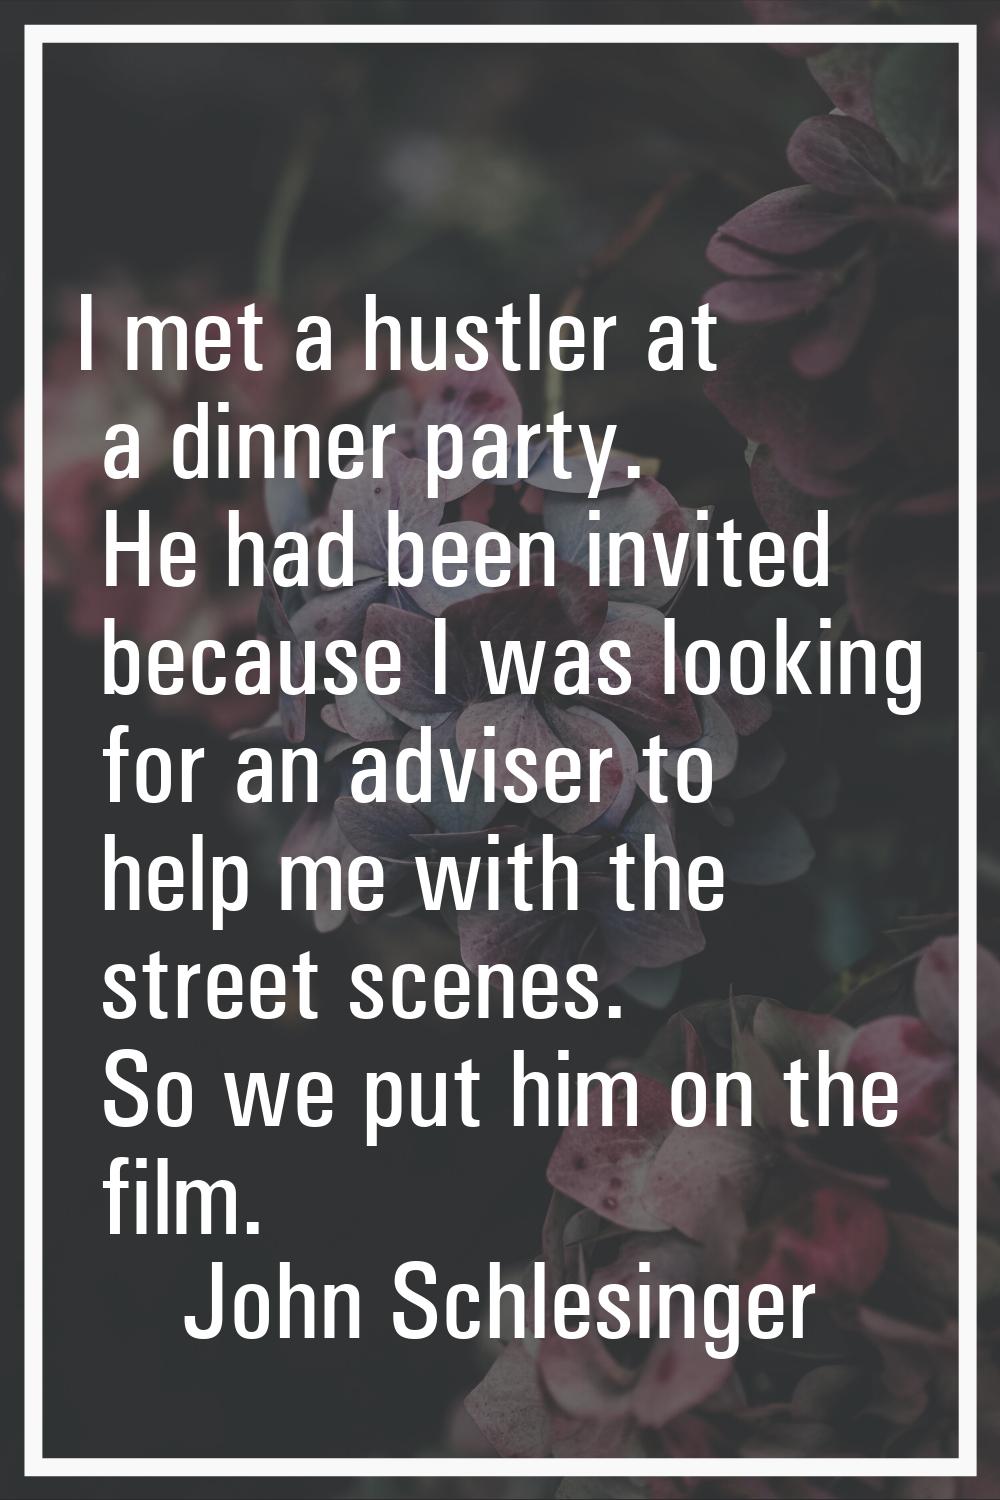 I met a hustler at a dinner party. He had been invited because I was looking for an adviser to help